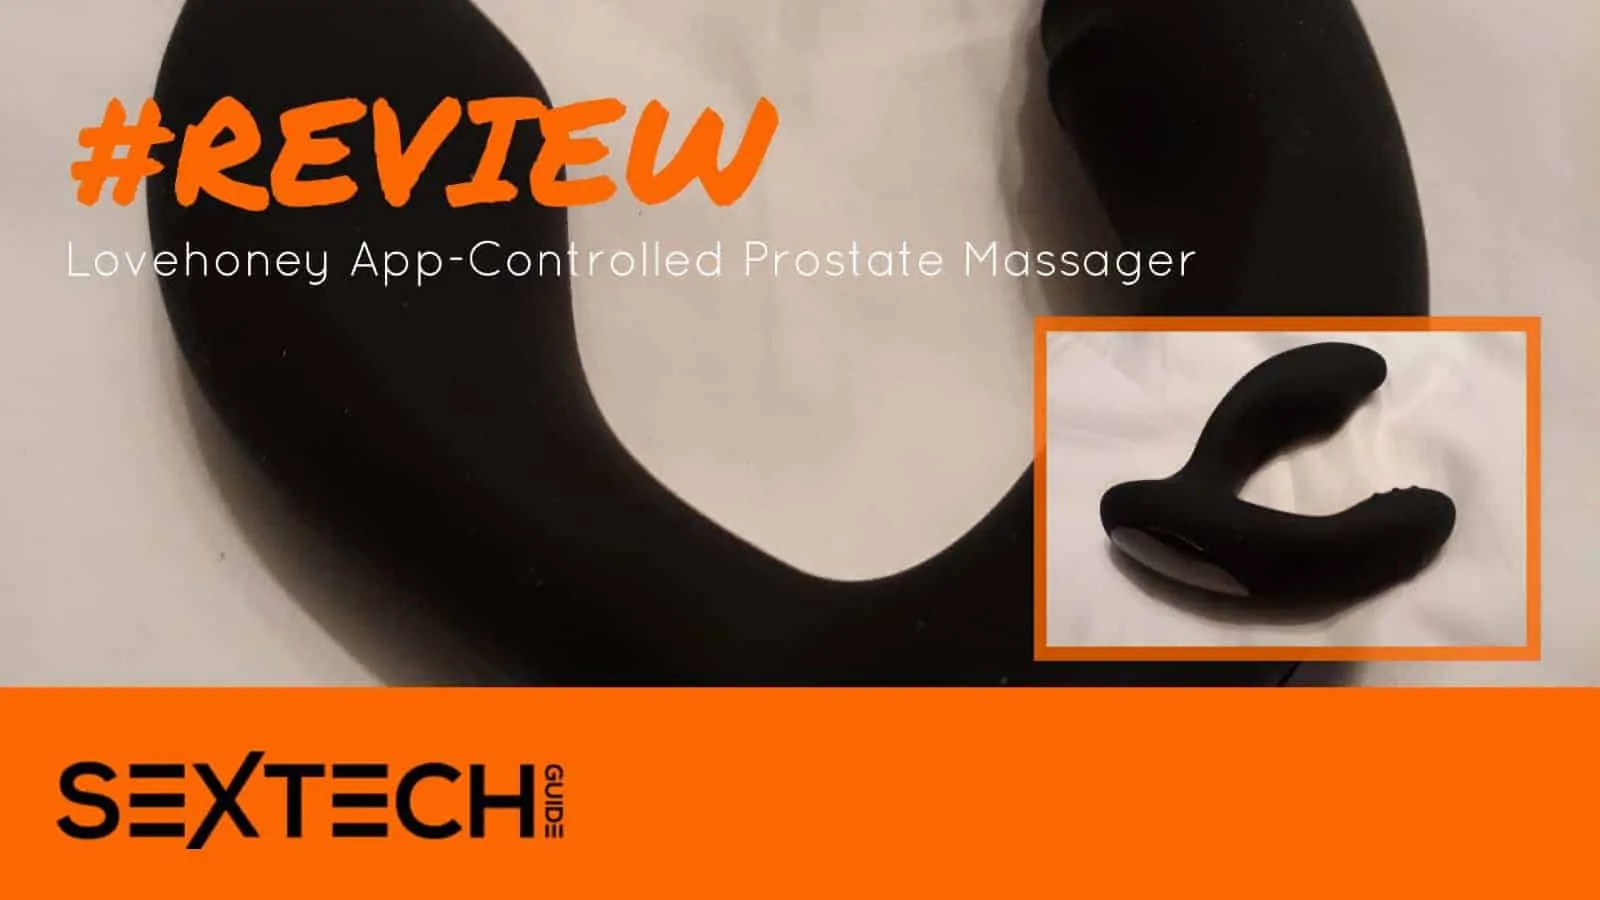 Review of the Lovehoney Desire Prostate Vibe, a sextech lullaby with APC control.